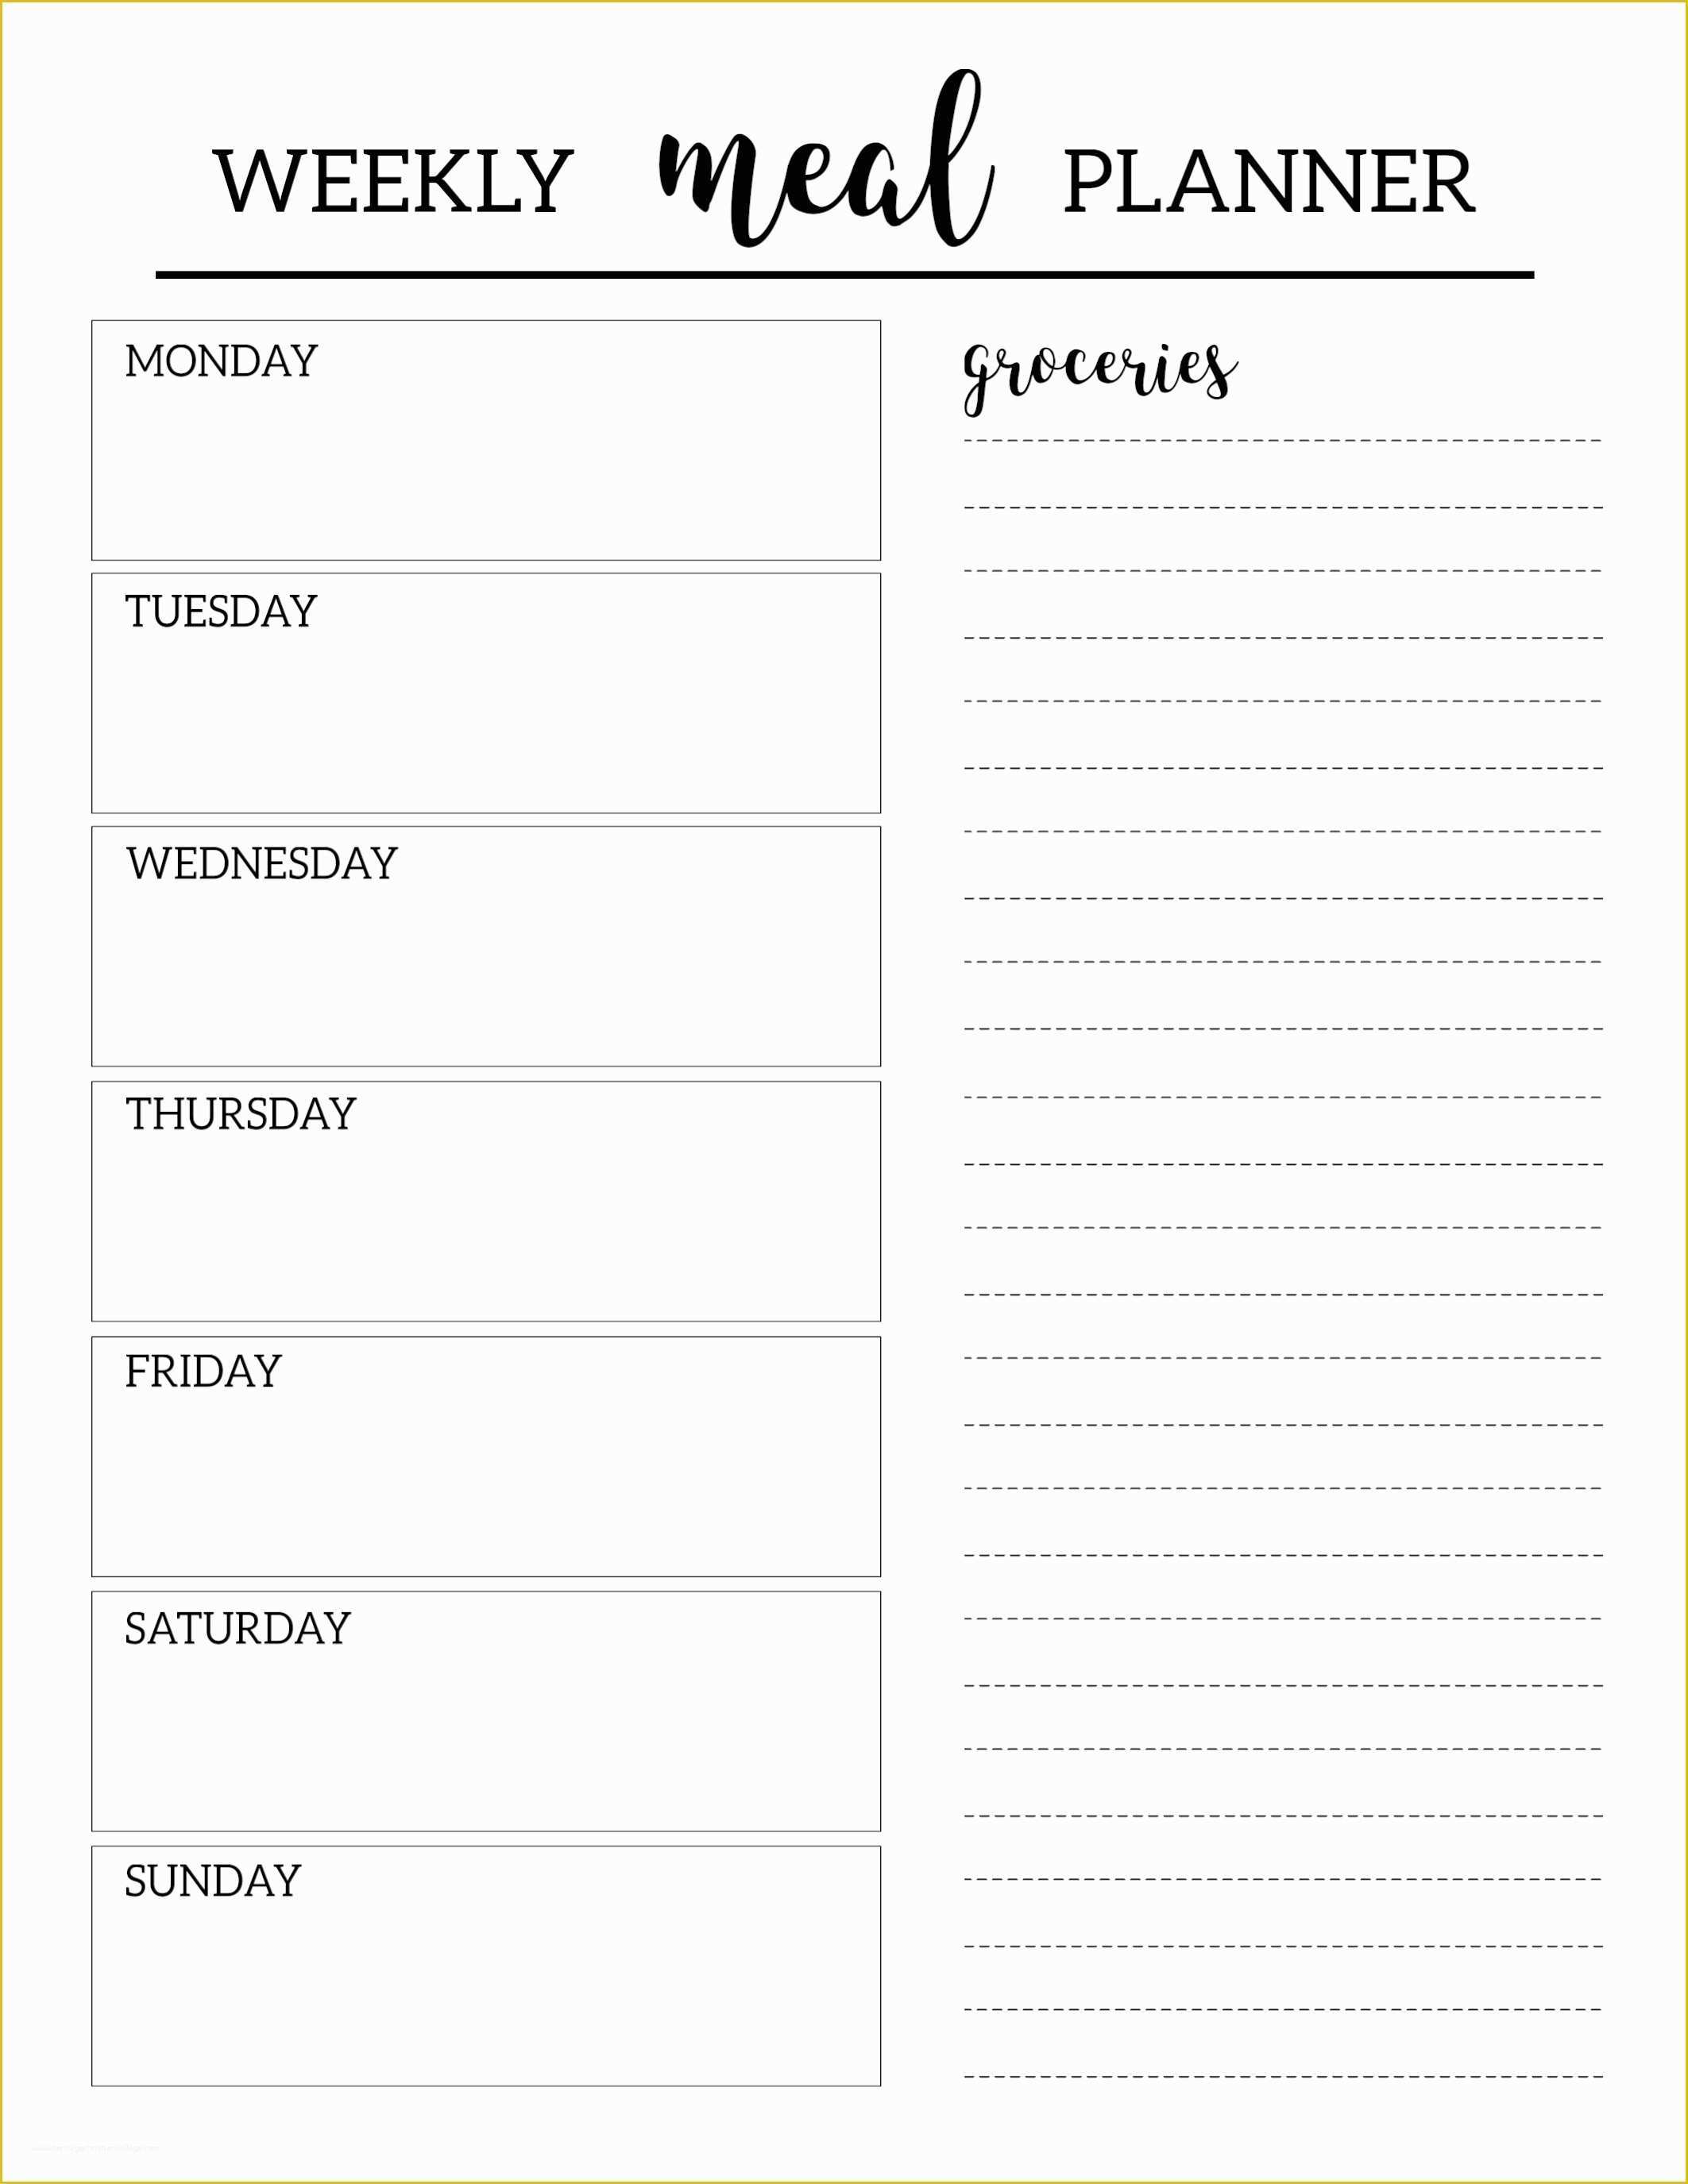 Free Meal Planner Template Of Free Printable Meal Planner Template Paper Trail Design